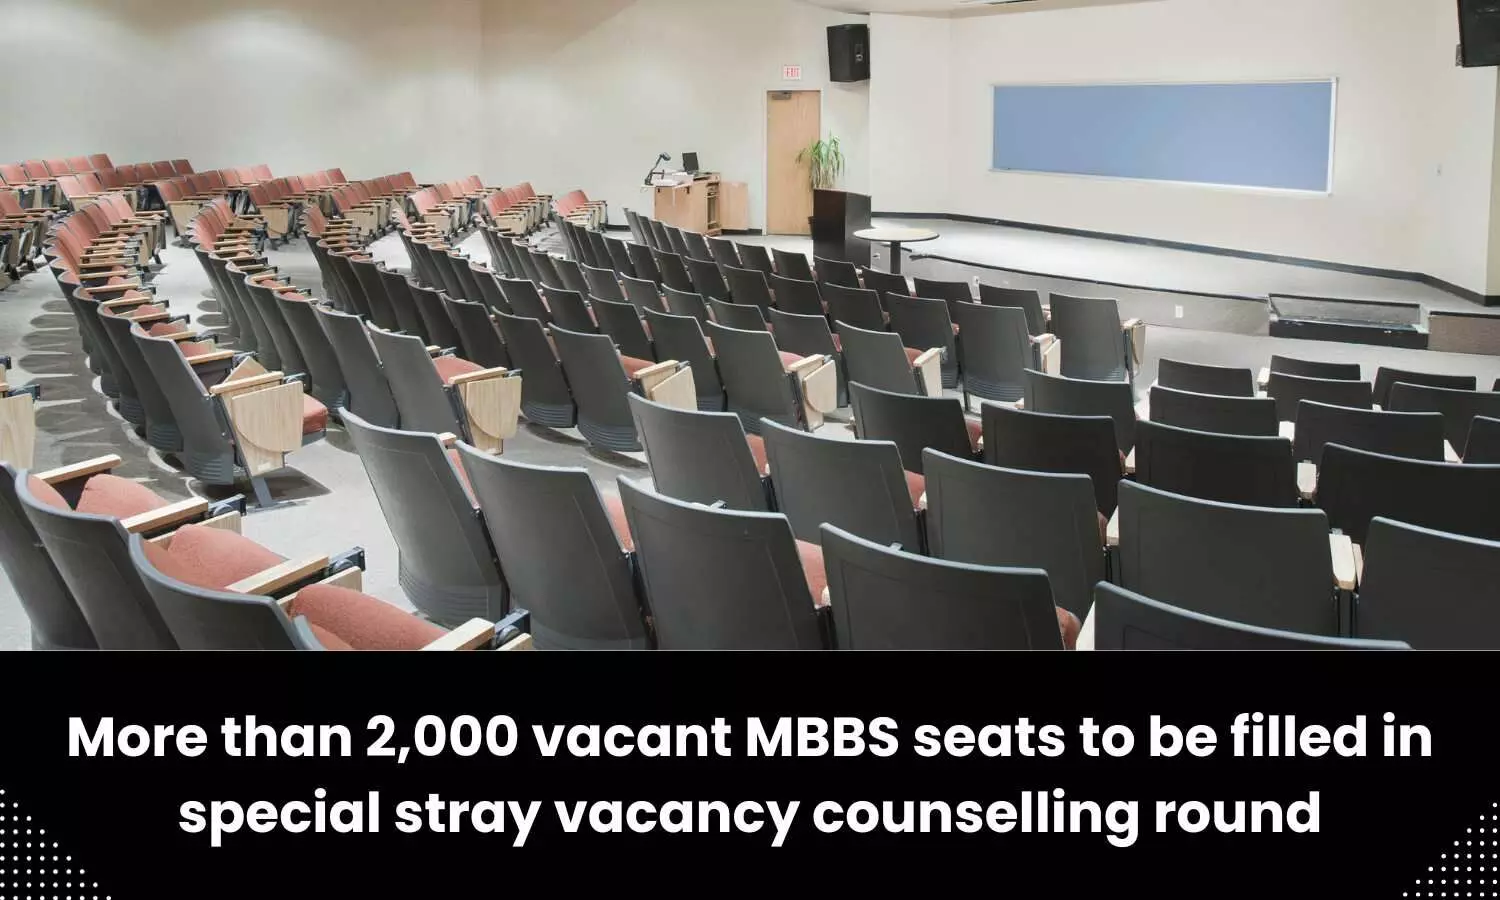 Over 2000 vacant MBBS seats to be filled in special stray vacancy counselling round